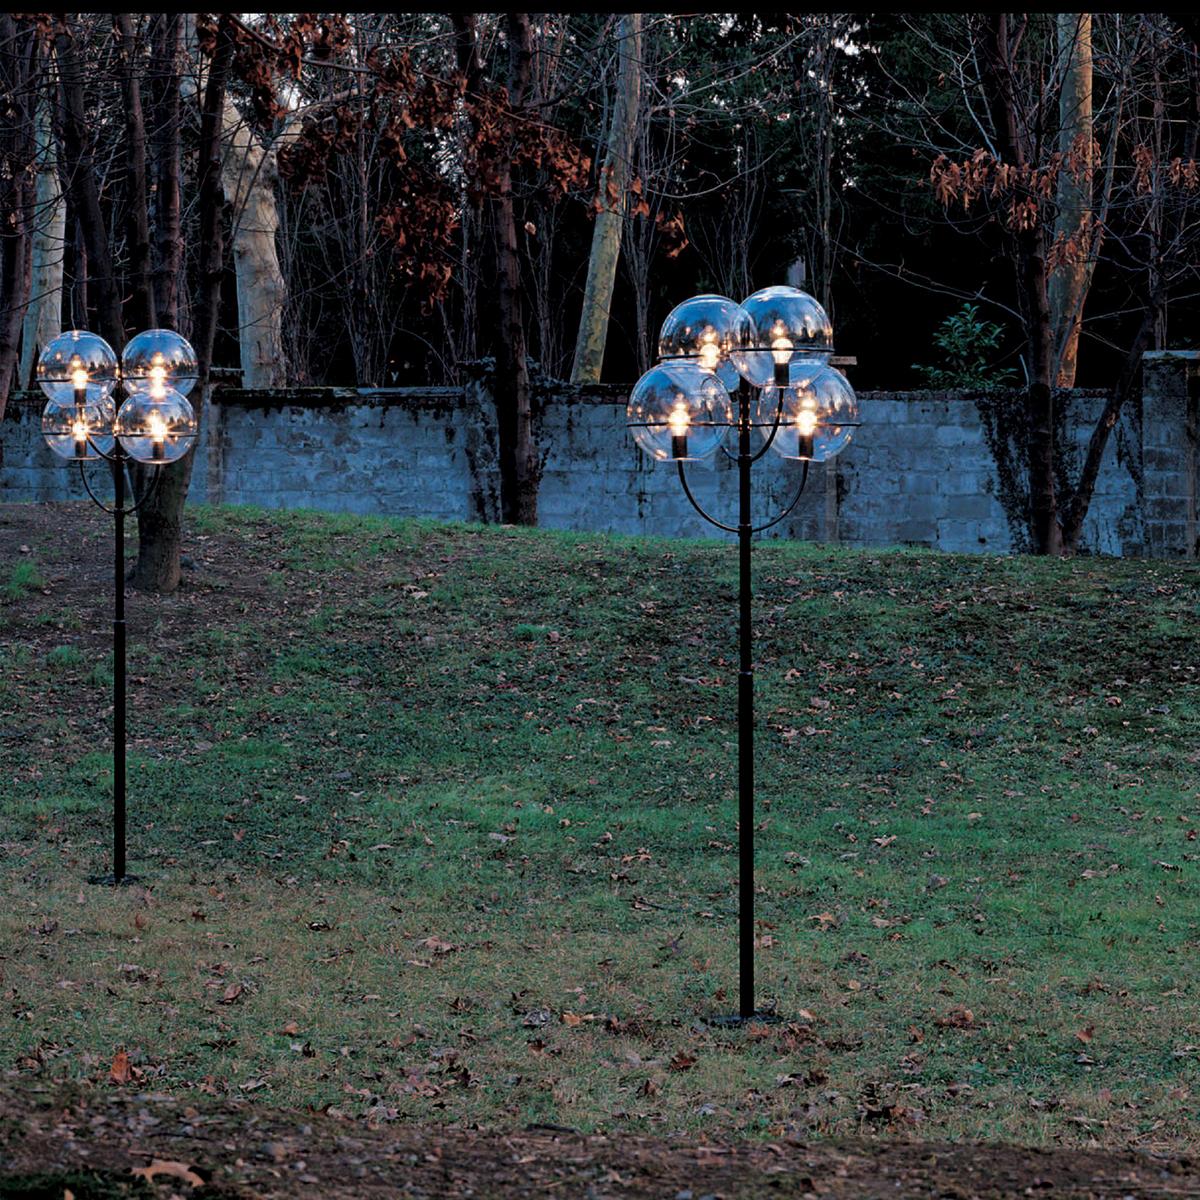 Outdoor lamp 'Lyndon 350 M' designed by Vico Magistretti in 1977. Outside floor lamp. Zinc-plated black lacquered metal structure, globes in transparent polycarbonate. Manufactured by Oluce, Italy.

Lyndon is a project by Vico Magistretti created